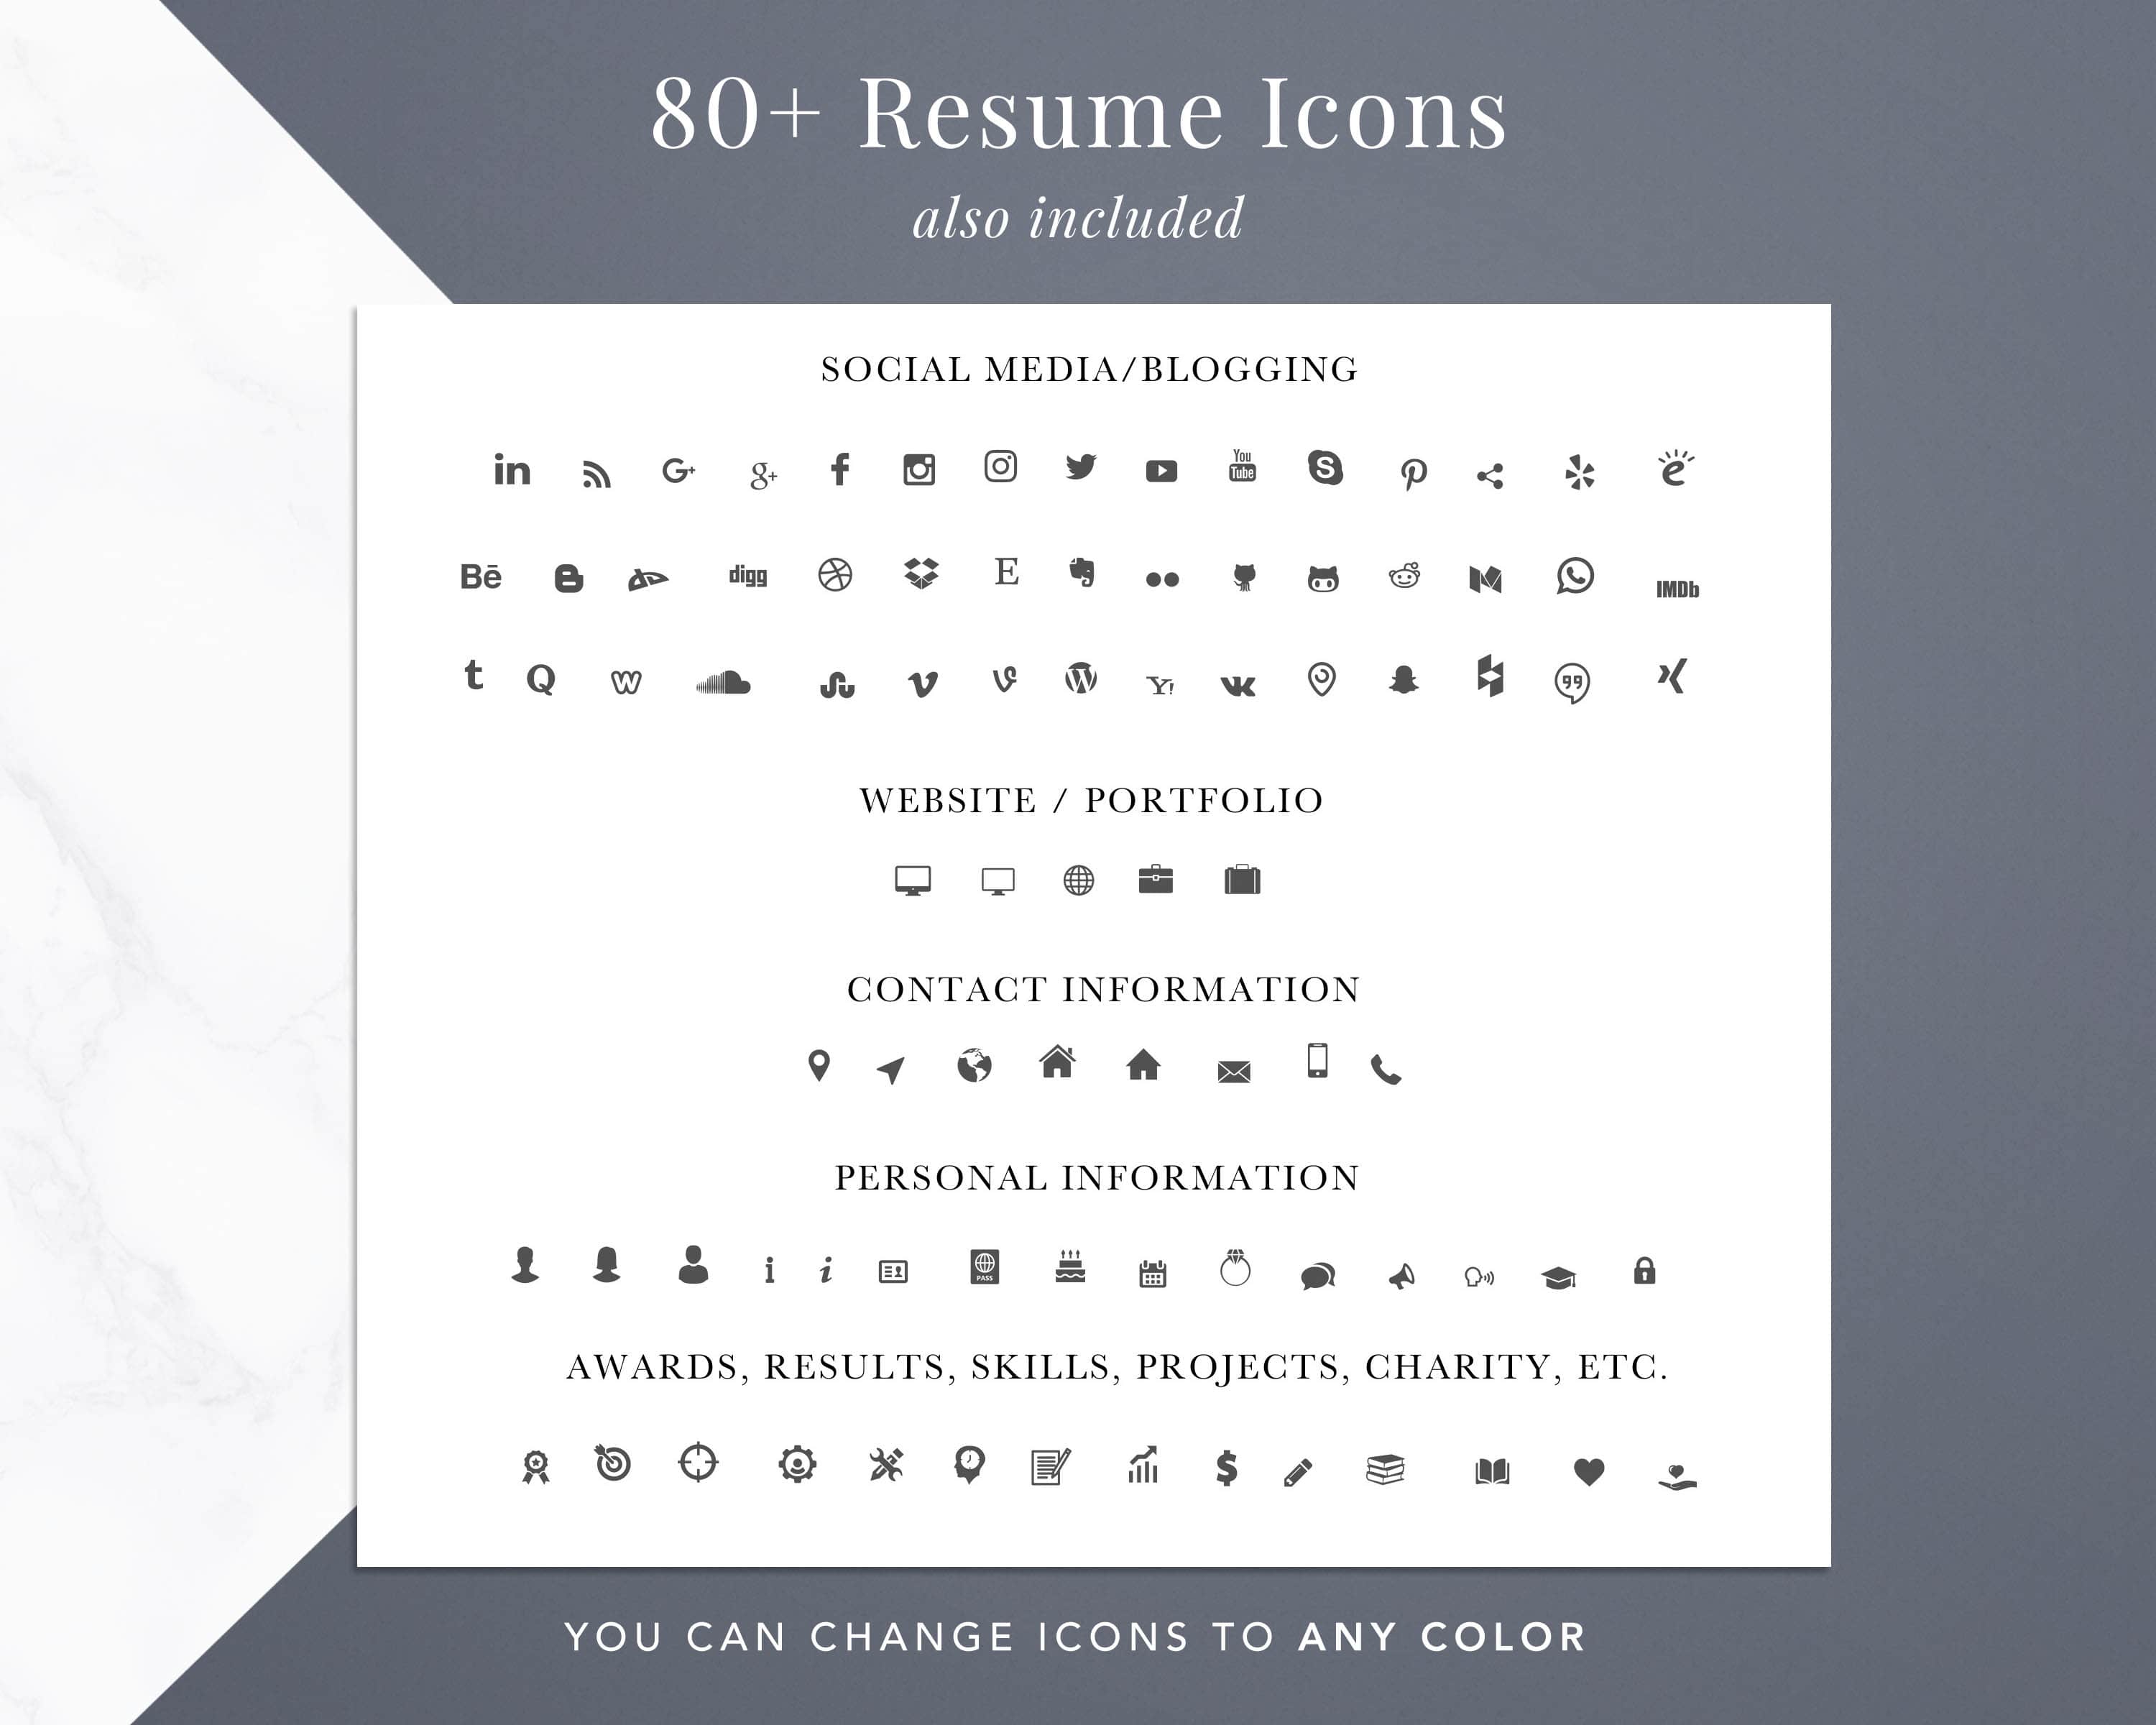 Resume Icons Pack, email phone address icons, linkedin icon for resume